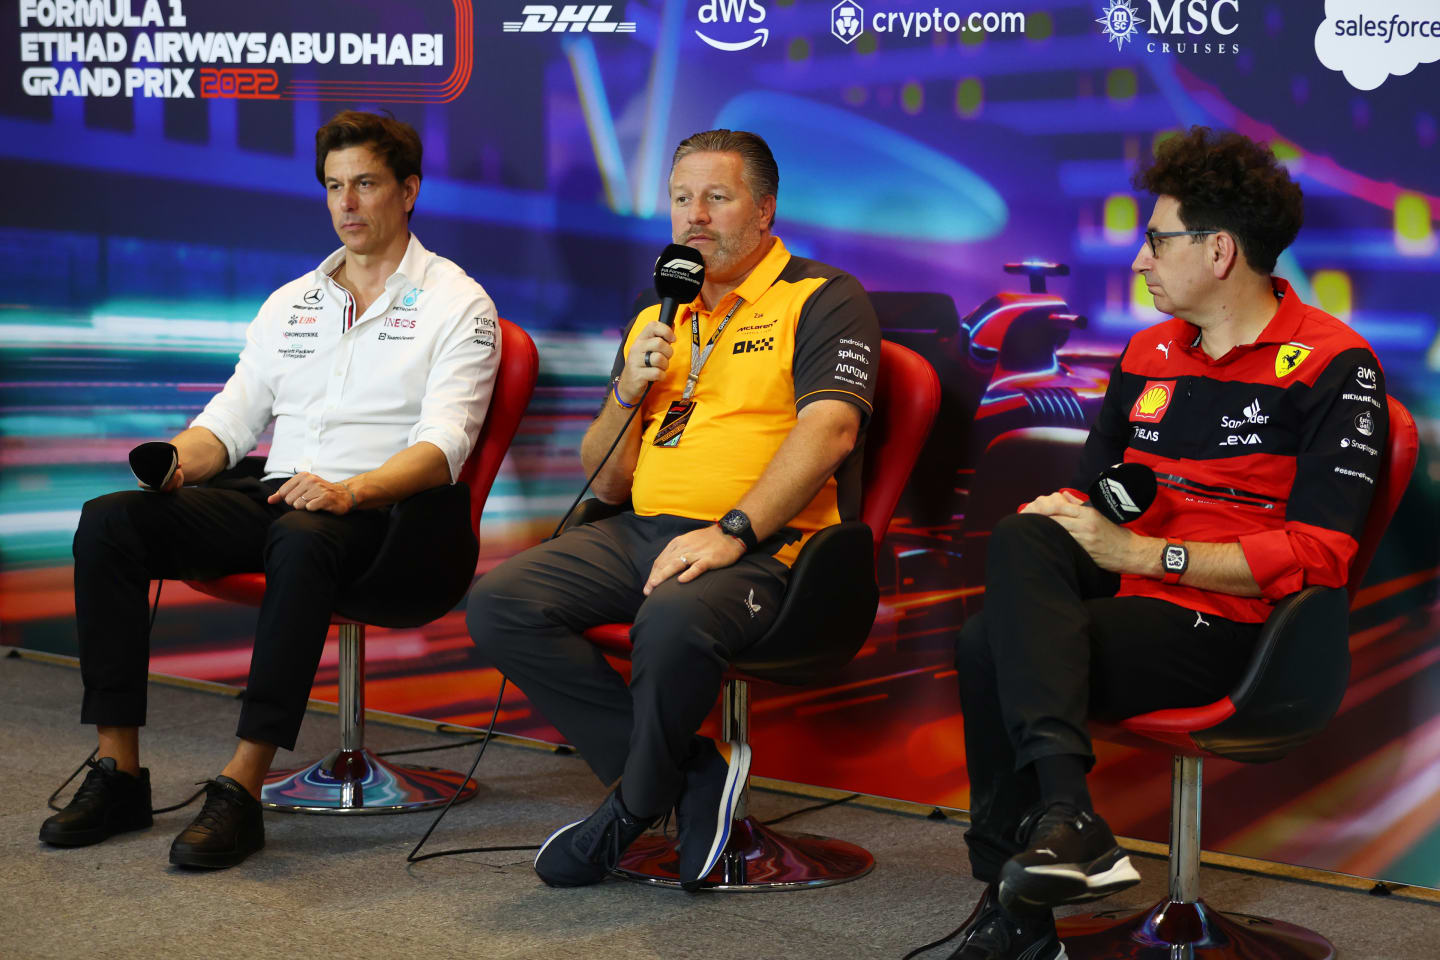 ABU DHABI, UNITED ARAB EMIRATES - NOVEMBER 19: McLaren Chief Executive Officer Zak Brown, Mercedes GP Executive Director Toto Wolff and Scuderia Ferrari Team Principal Mattia Binotto attend the Team Principals Press Conference prior to final practice ahead of the F1 Grand Prix of Abu Dhabi at Yas Marina Circuit on November 19, 2022 in Abu Dhabi, United Arab Emirates. (Photo by Bryn Lennon/Getty Images)